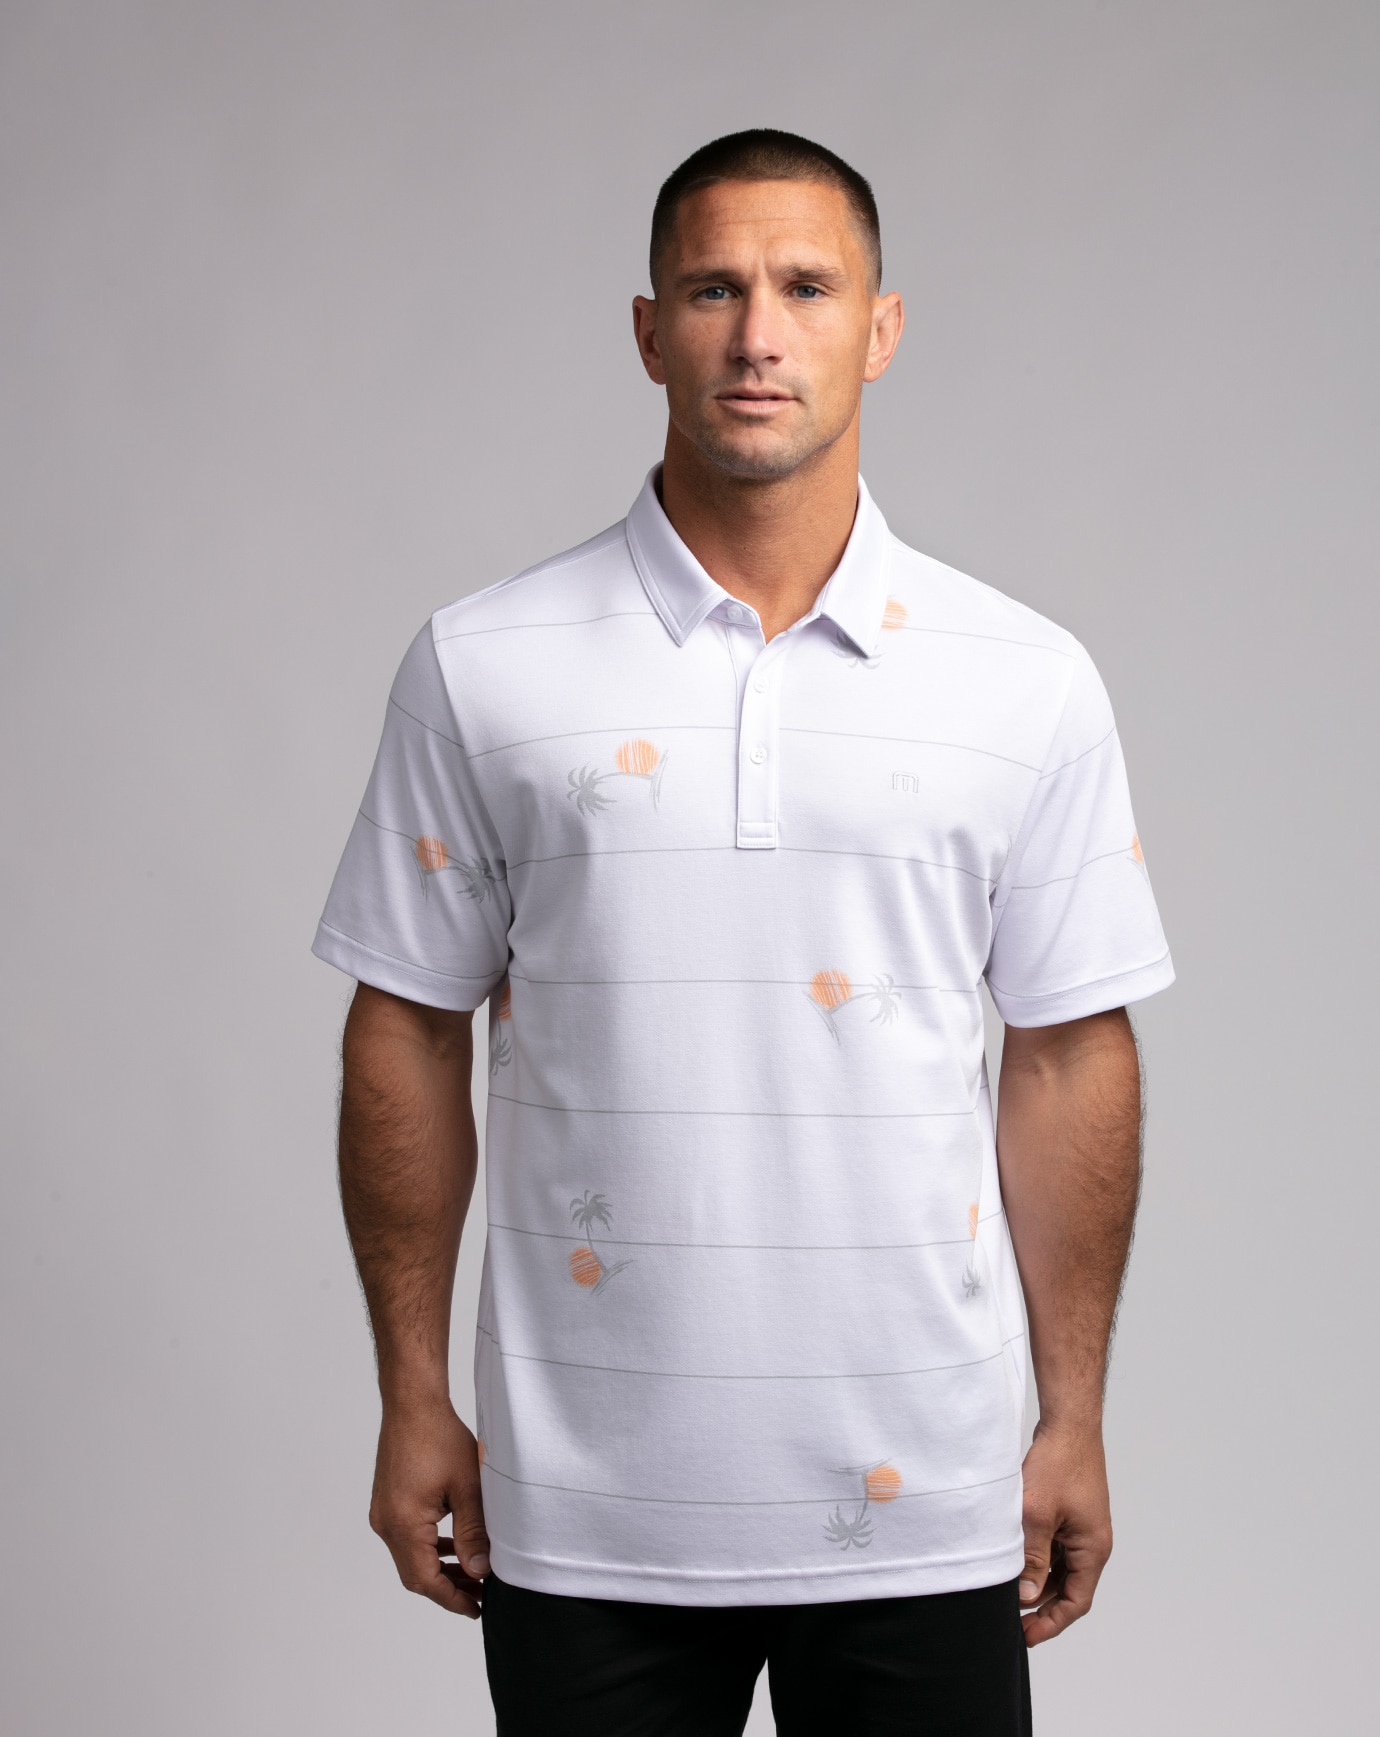 PANTHER POLO_1MS643_1WHT_